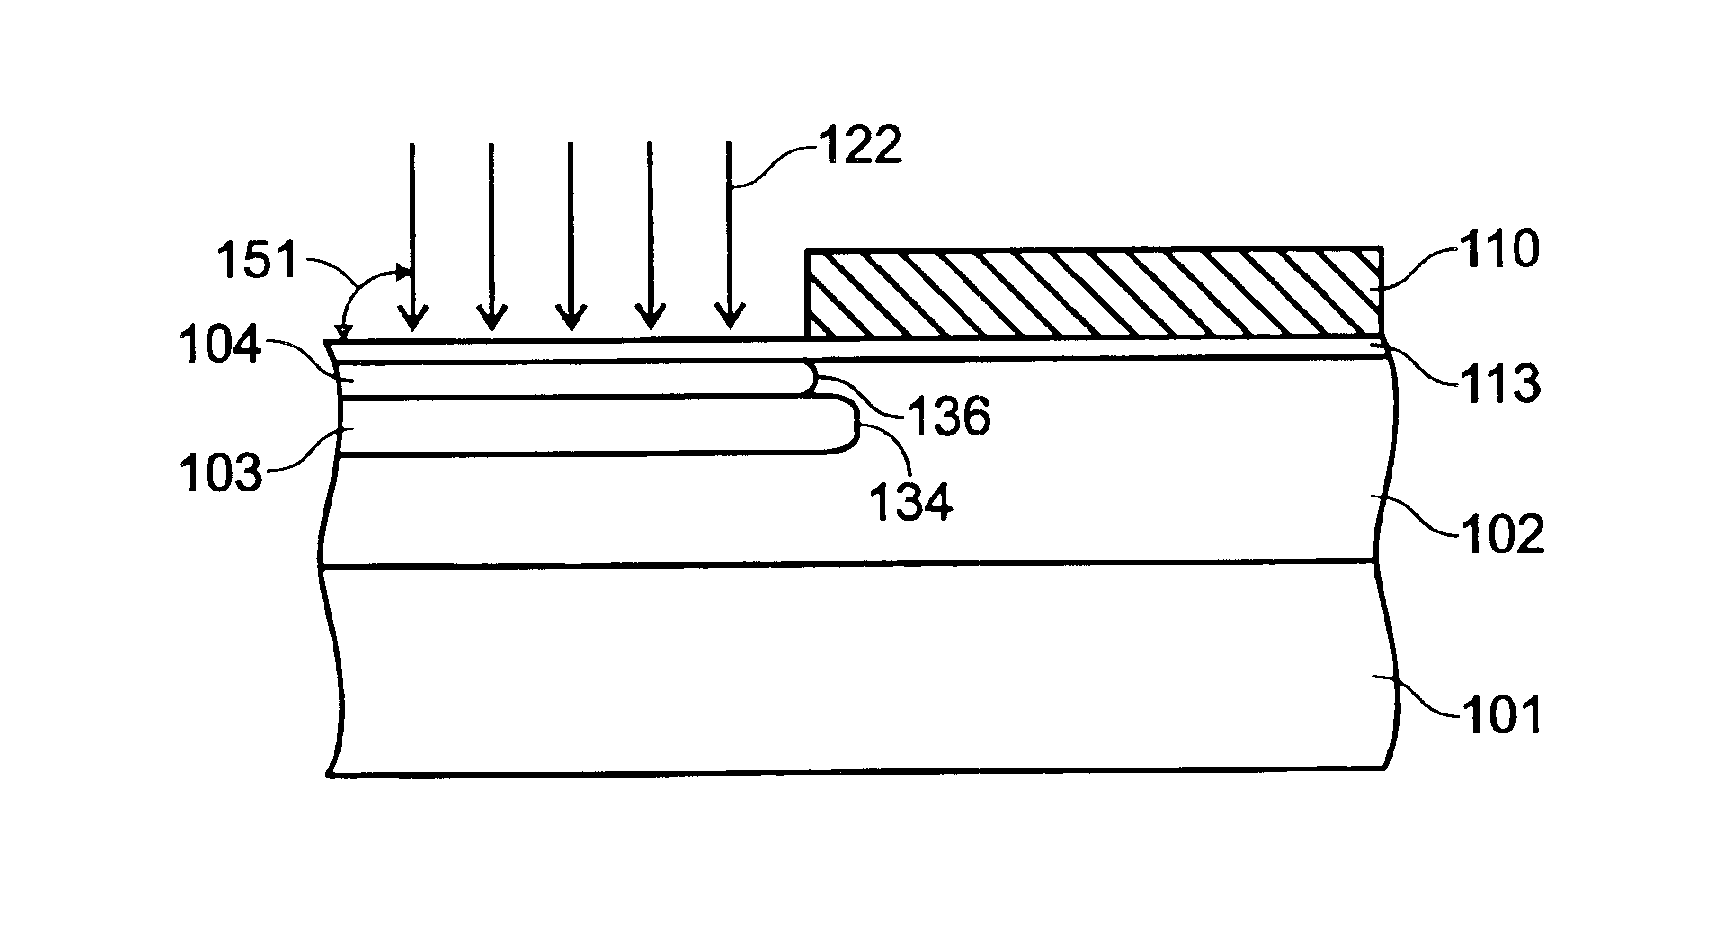 Solid picture element manufacturing method